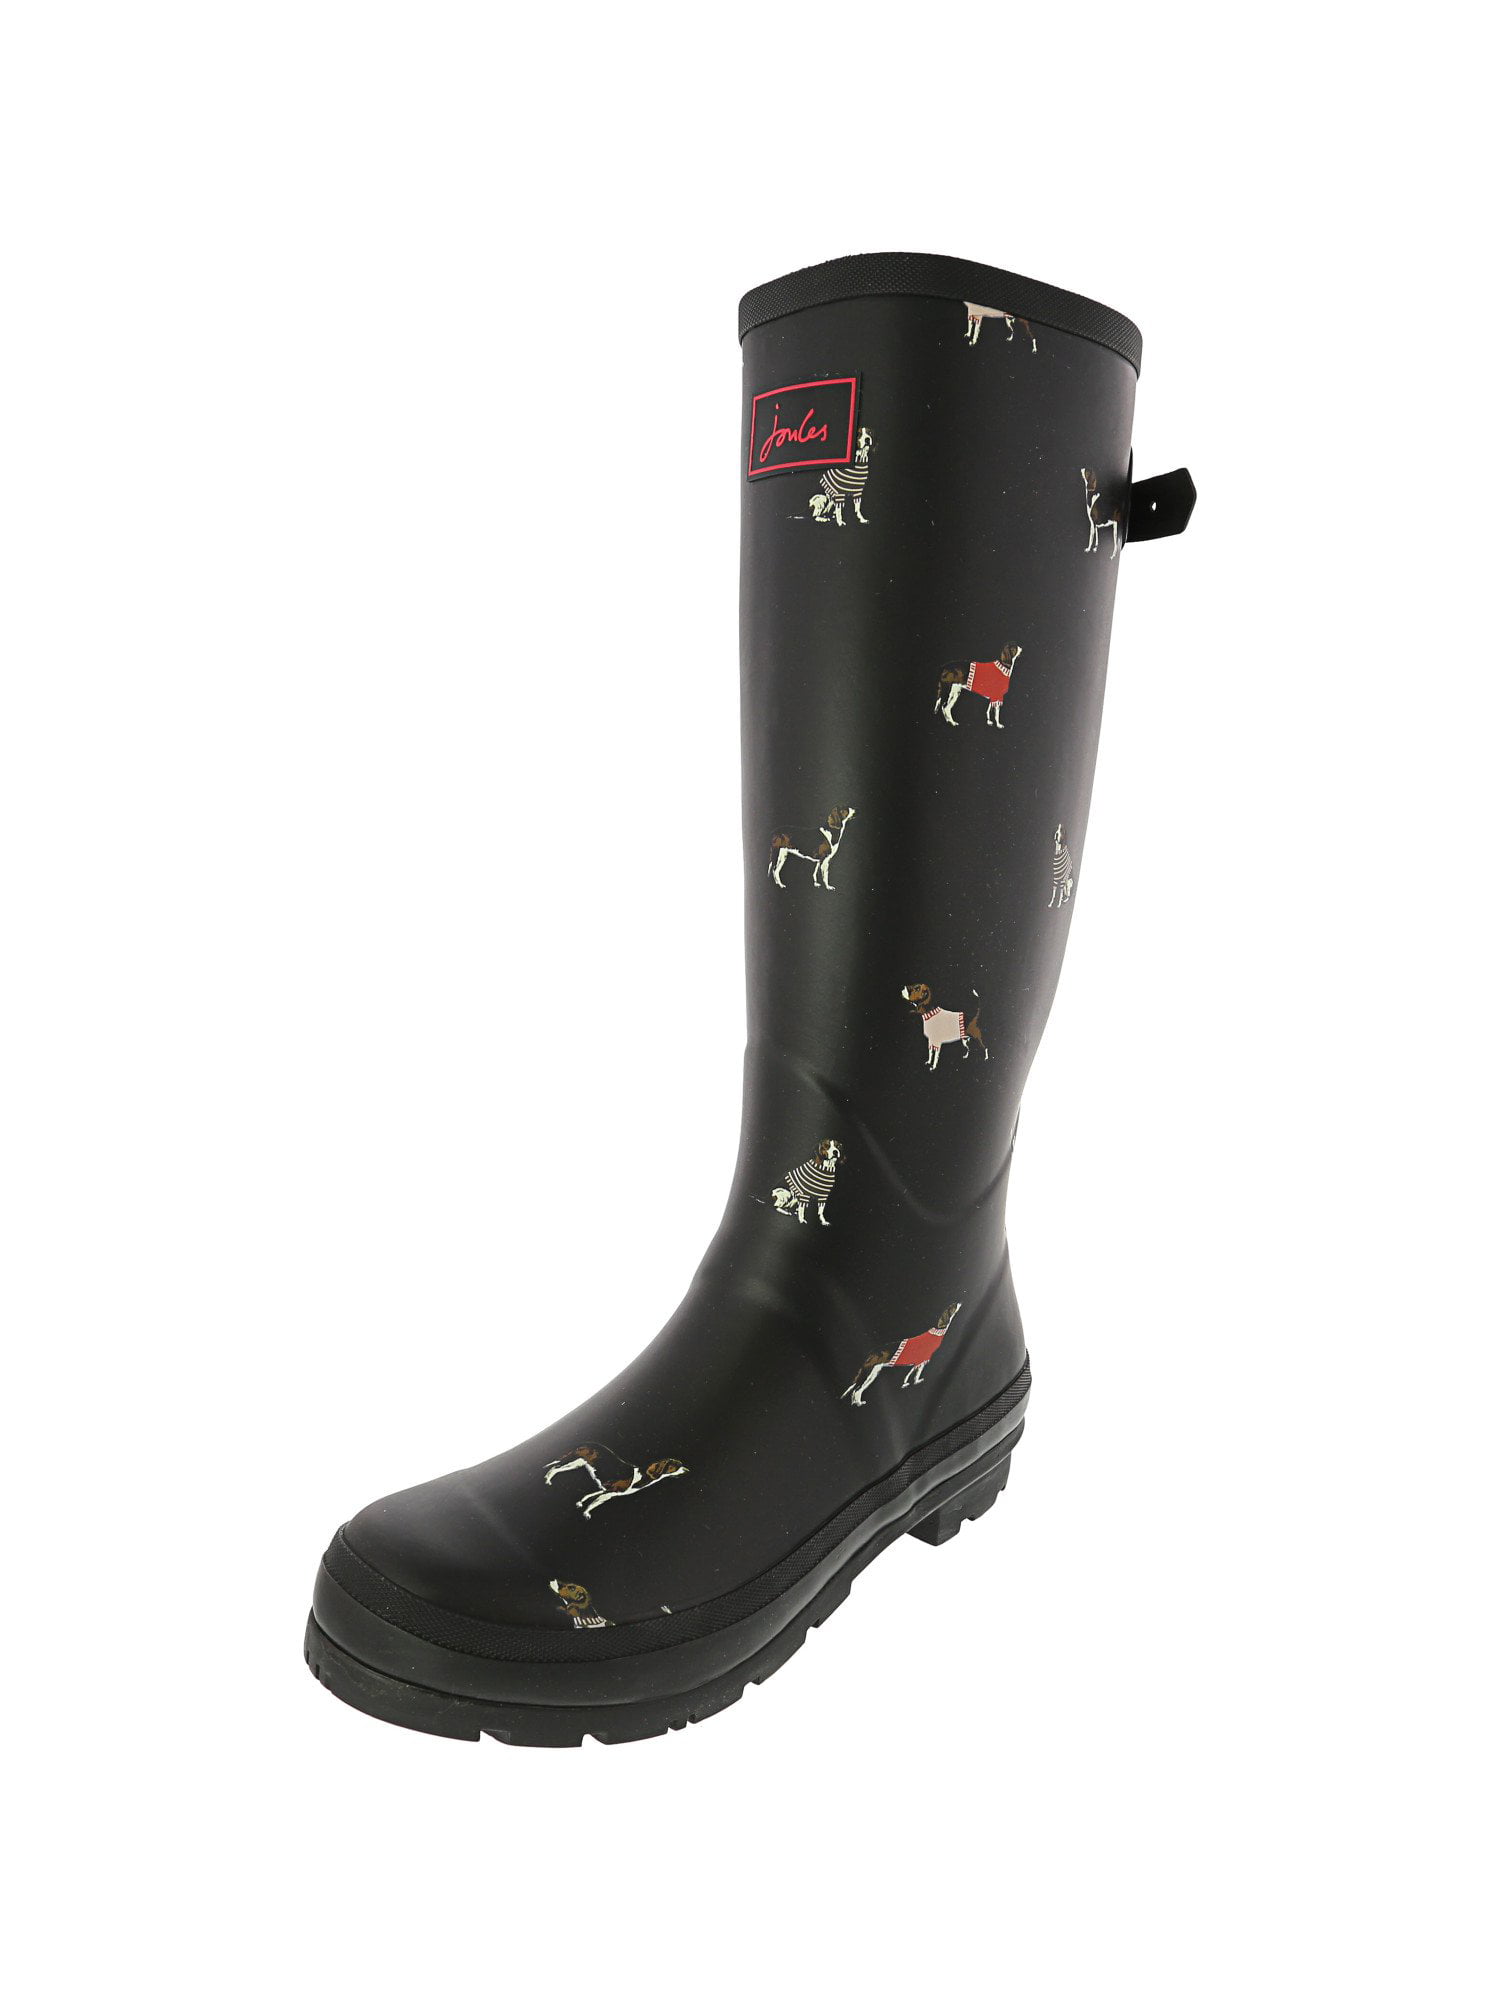 All Sole Girls Shoes Boots Rain Boots Girls Dog Print Wellies 